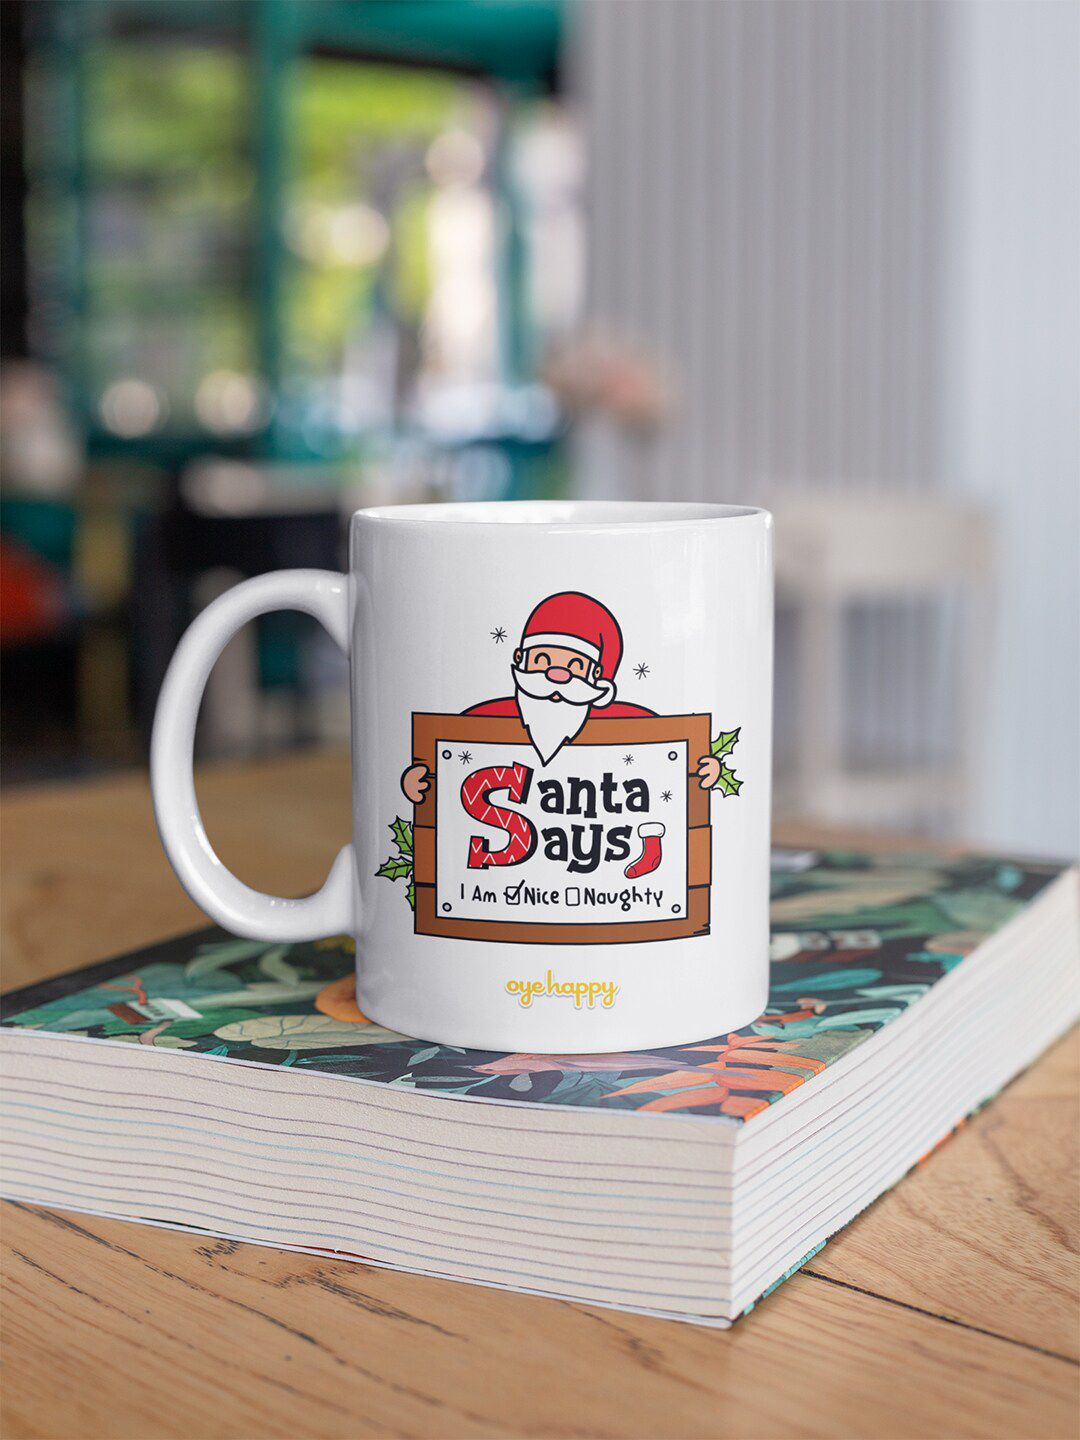 Oye Happy White & Red Text or Slogans Printed Ceramic Glossy Mug Price in India